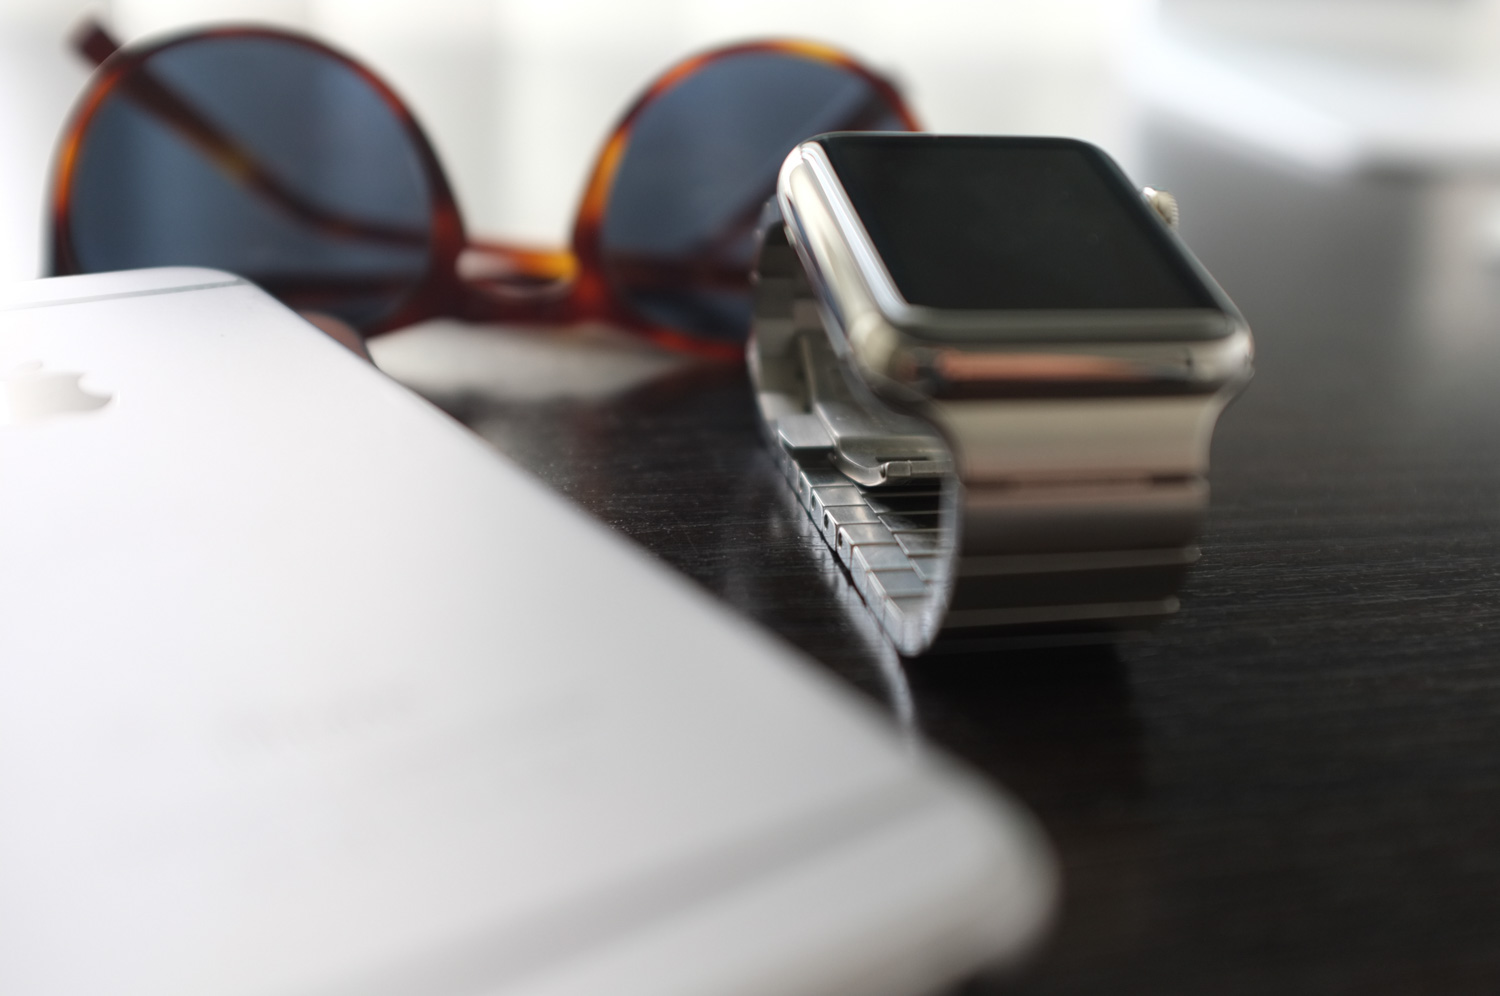 Apple Updating Apple Watch In March With New Bands, New Design In The